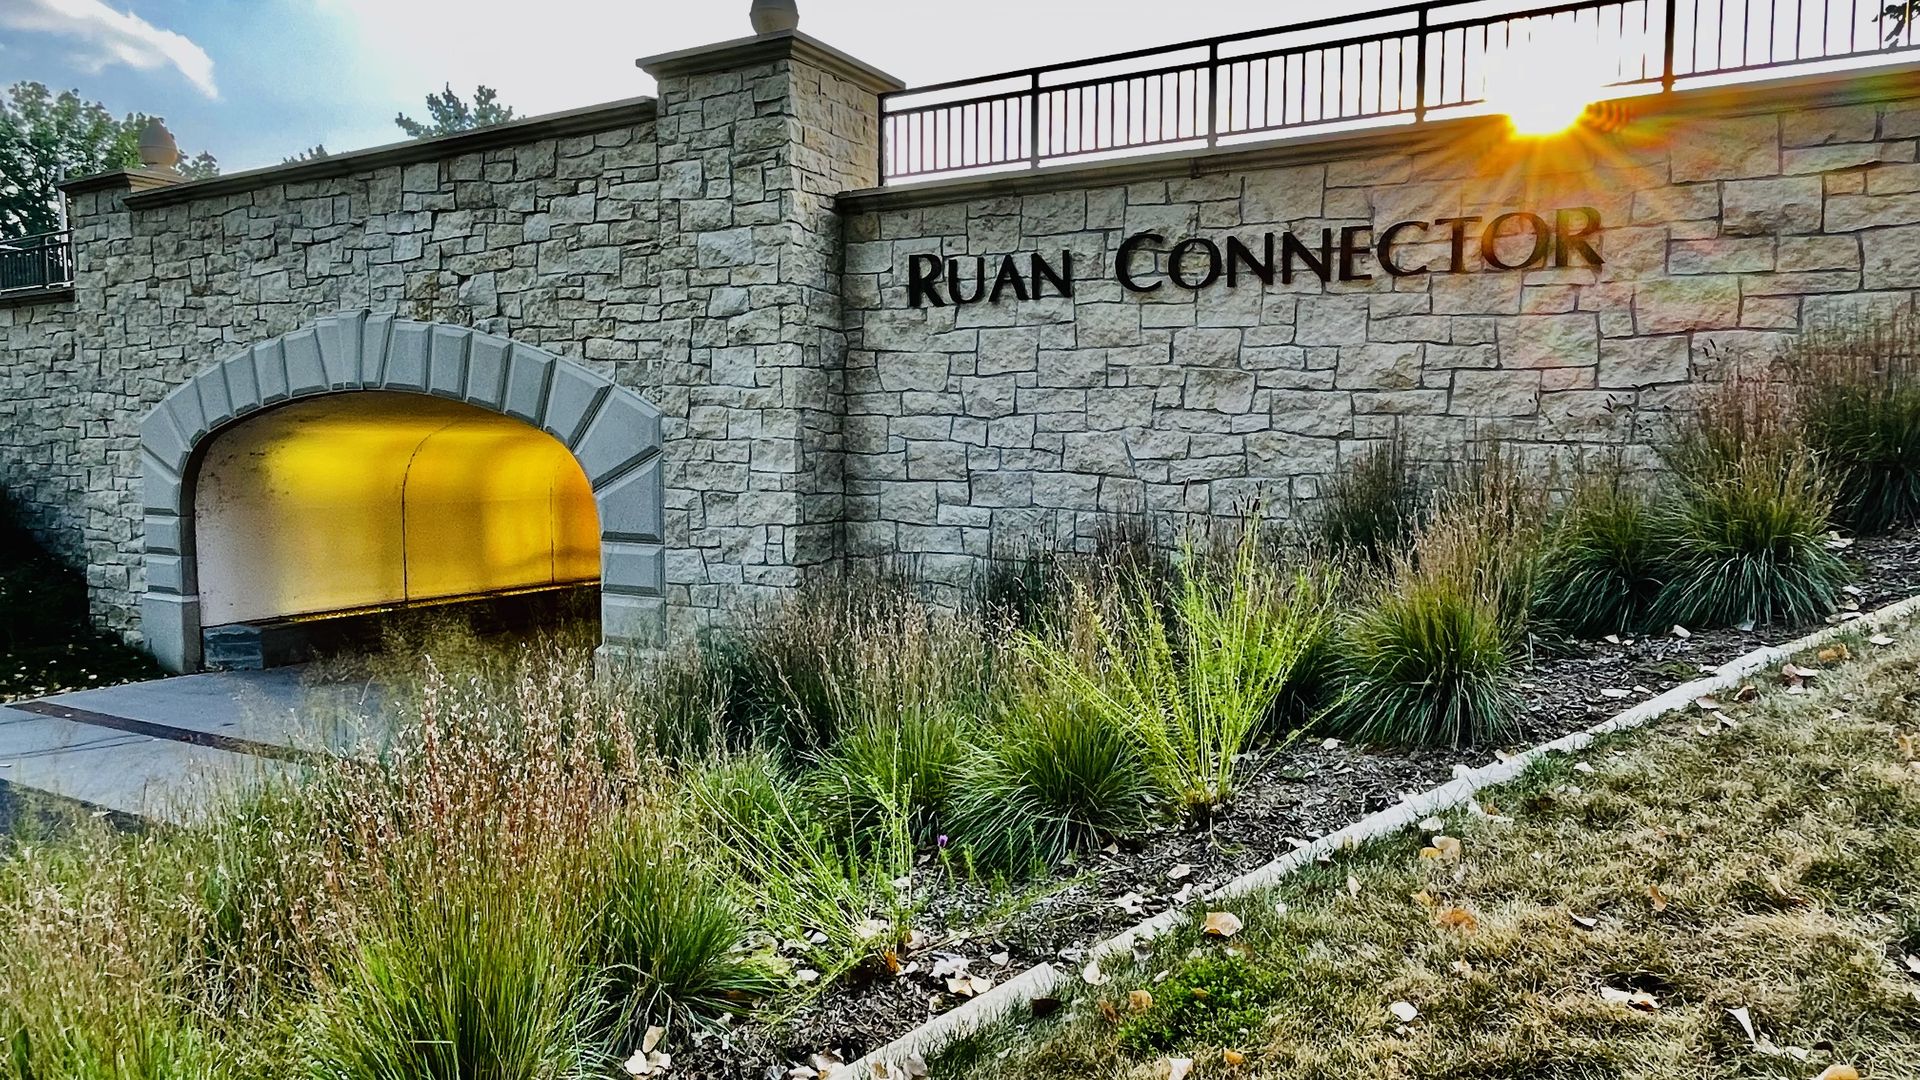 A photo of the Ruan Connector.